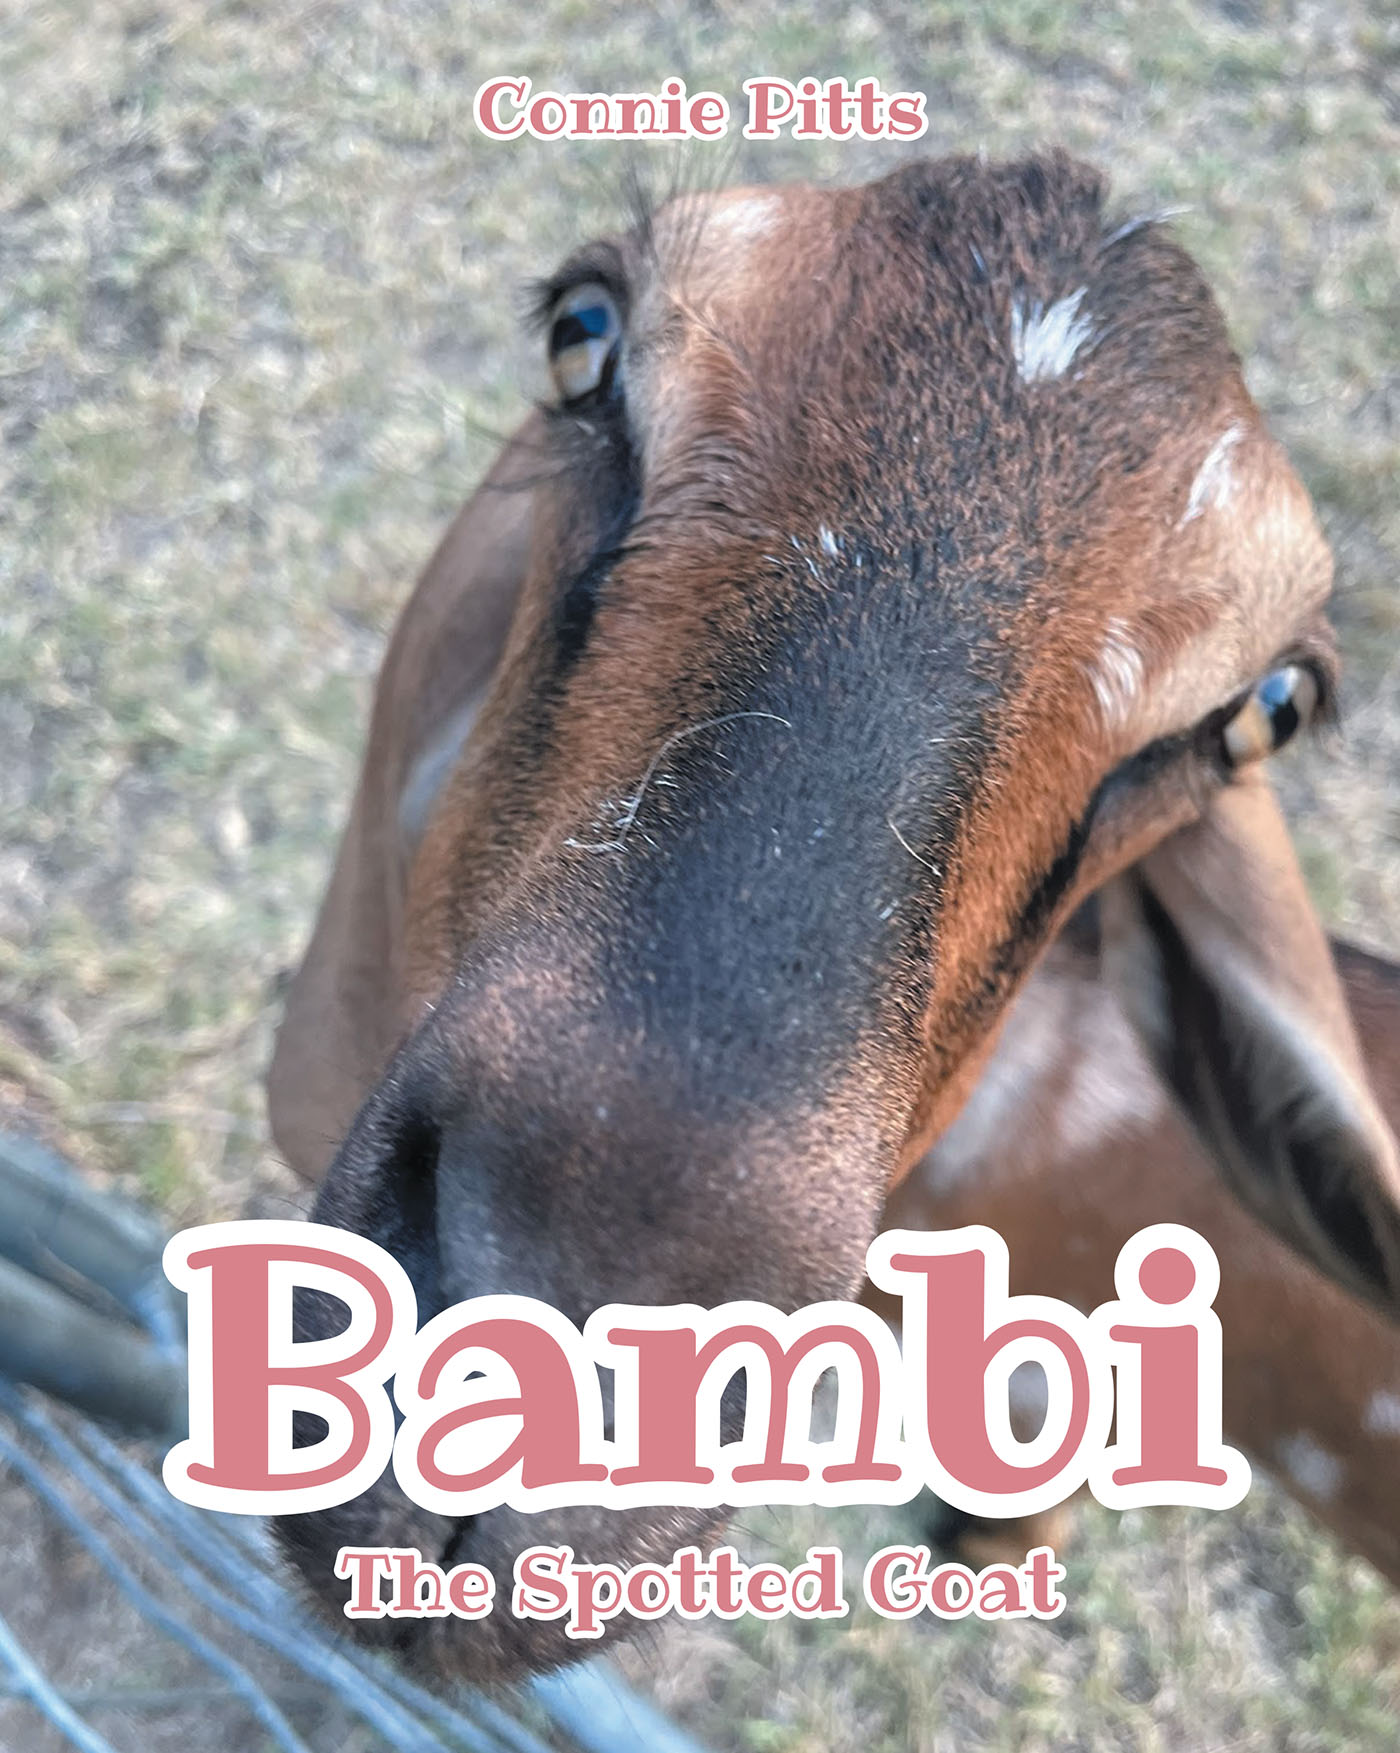 Author Connie Pitts’s New Book, "Bambi: The Spotted Goat," Centers Around the True Adventures of a Nubian Goat as She Navigates Her New Home & Tries to Make New Friends